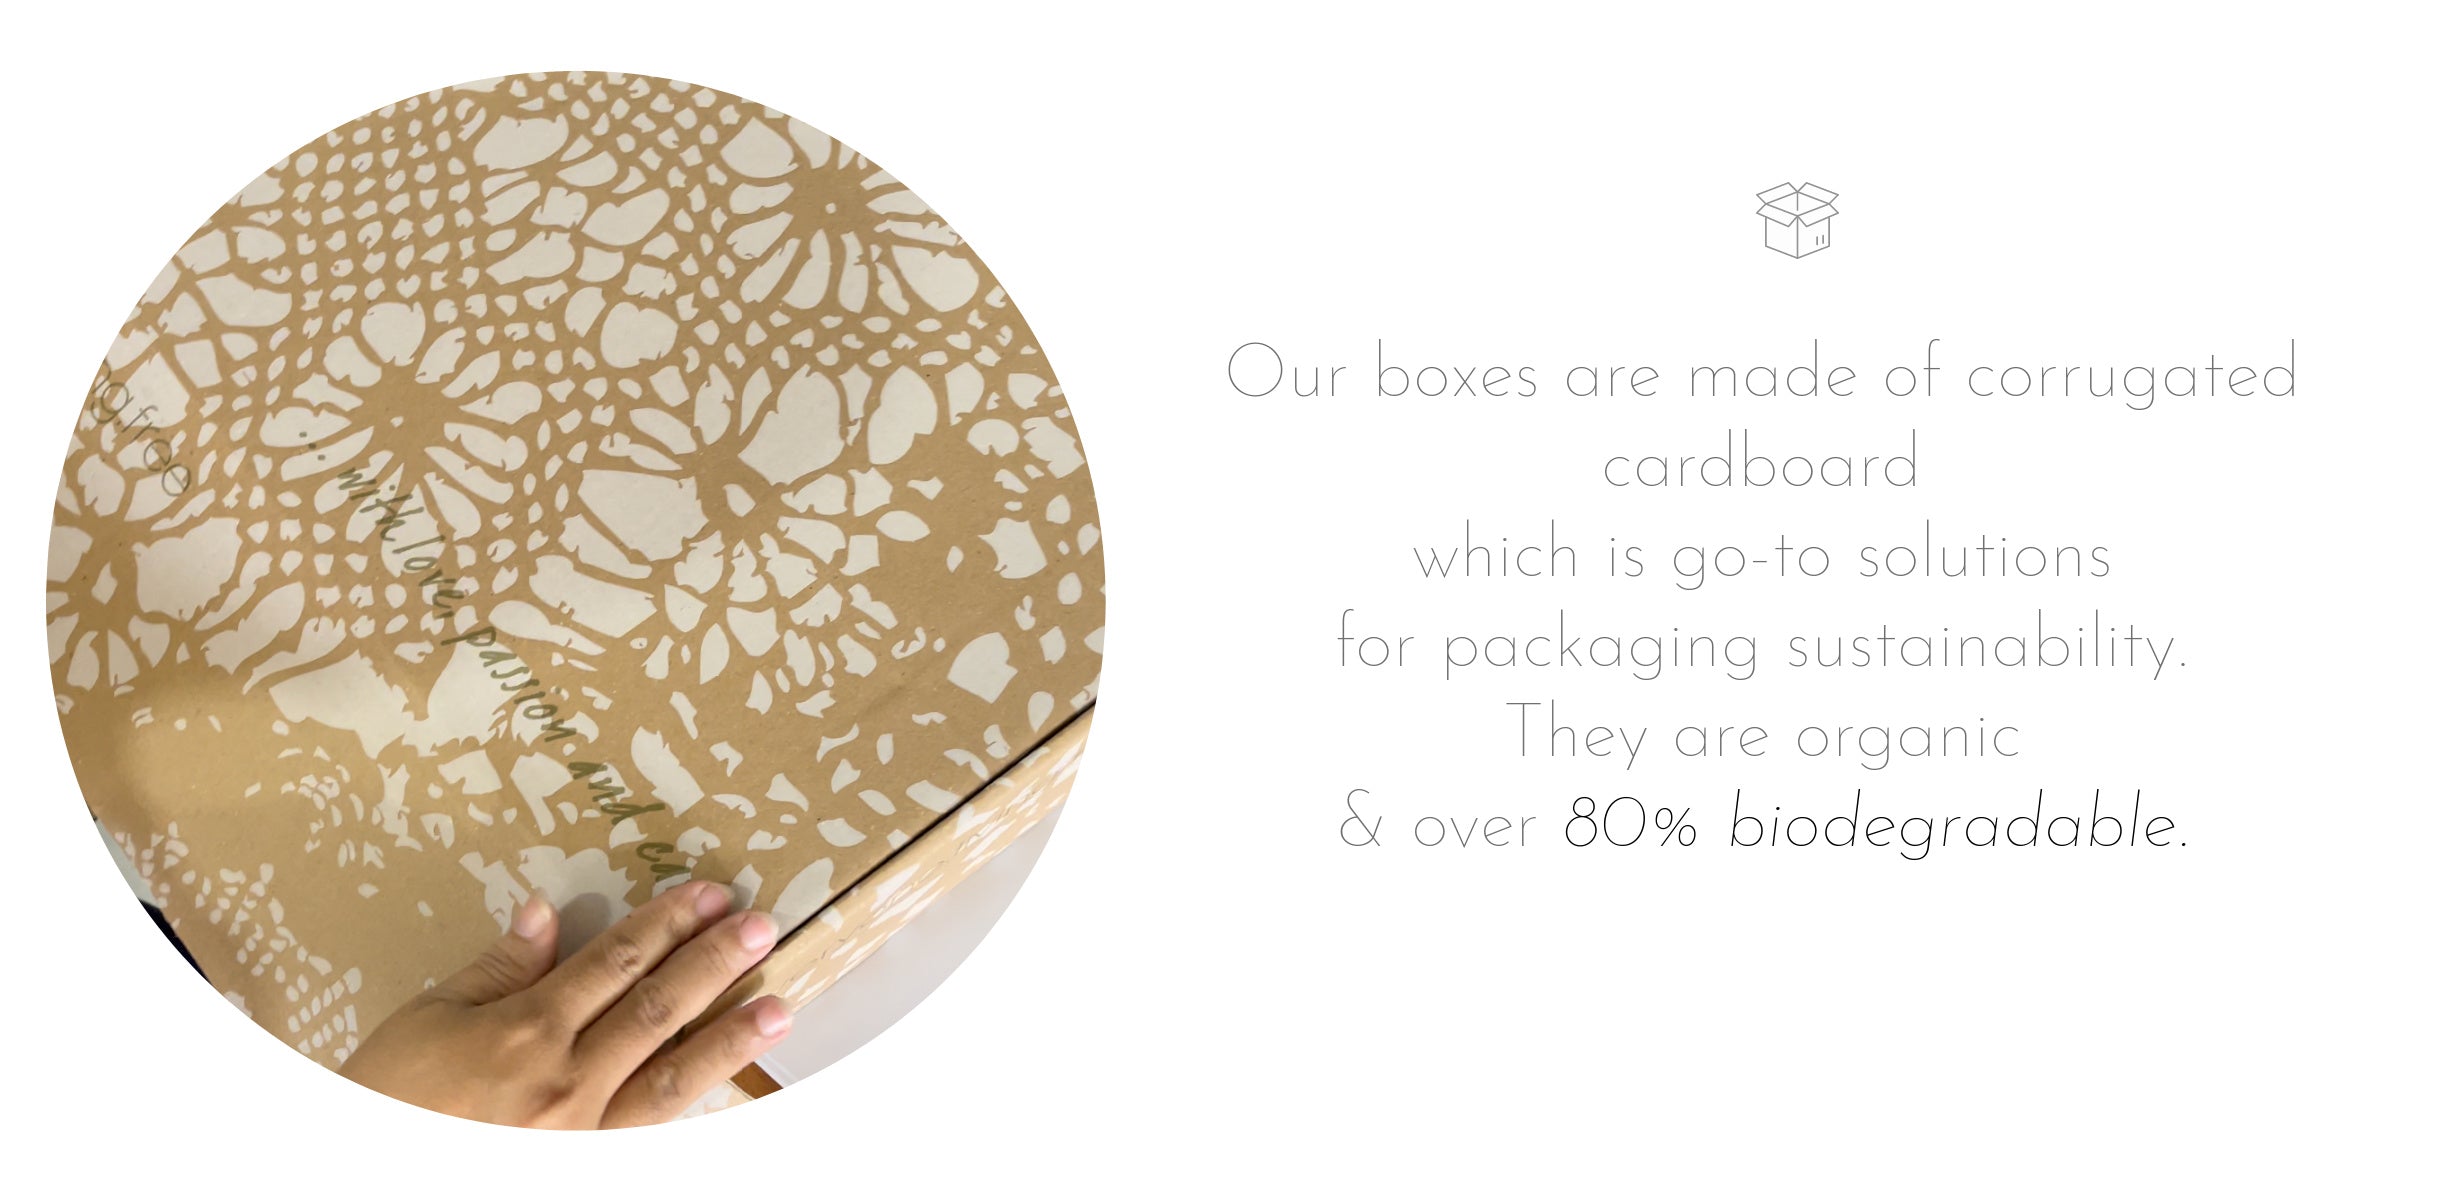 Our boxes are crafted from corrugated cardboard which is go-to solutions for packaging sustainability. They are organic and over  80% biodegradable.